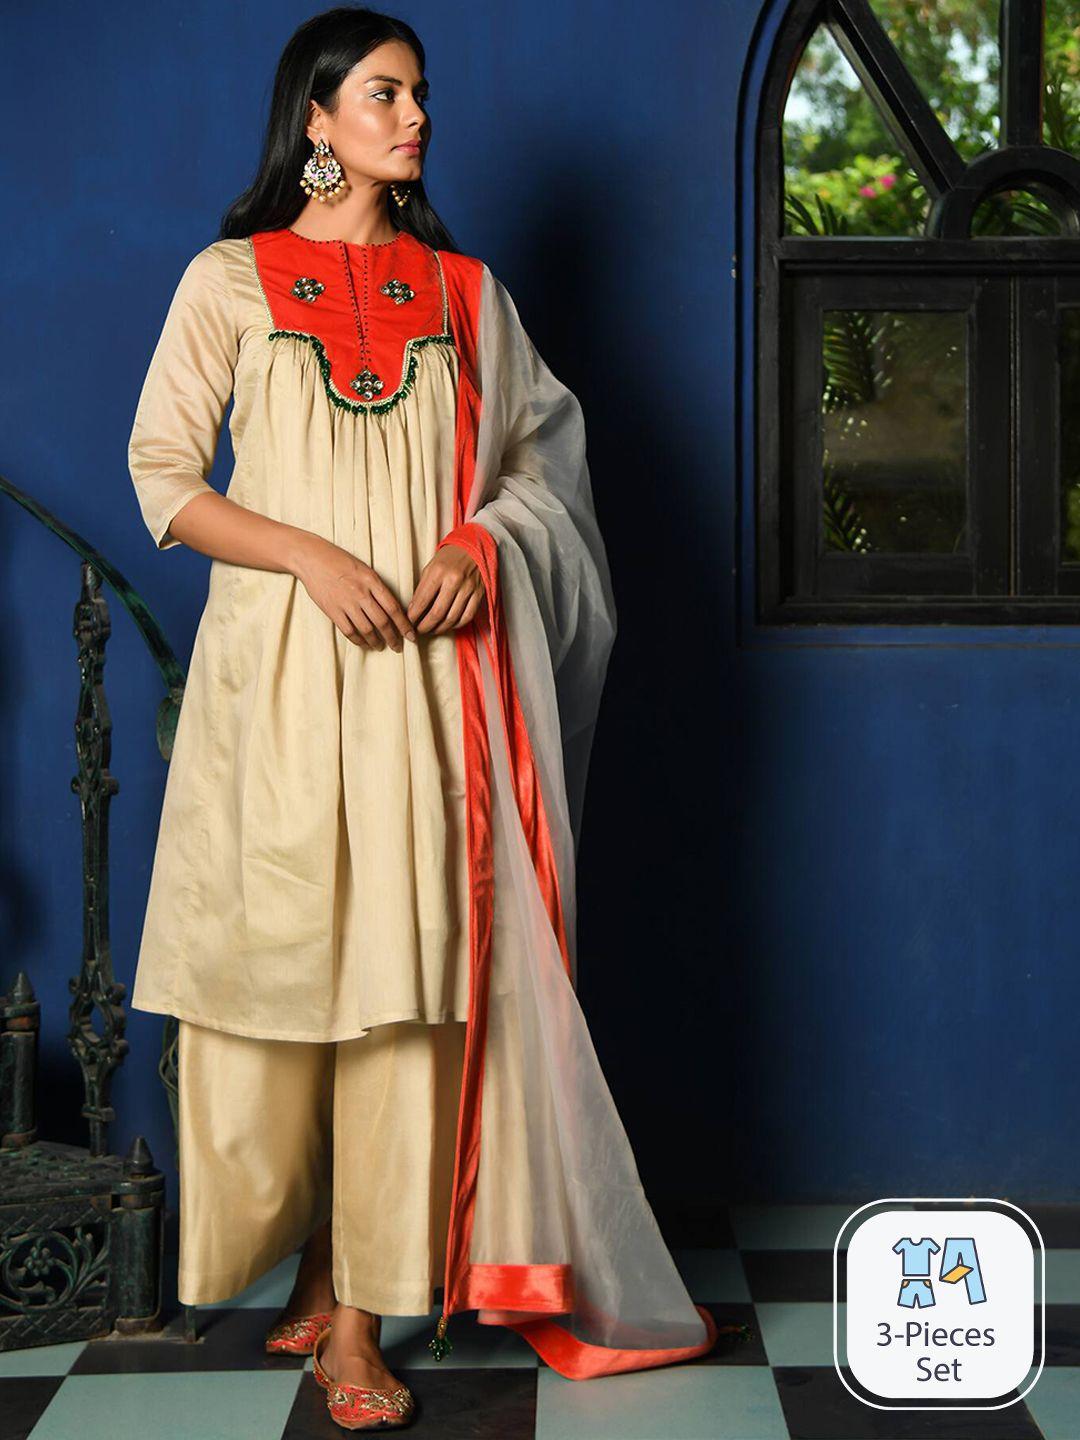 nuhh floral embroidered beads and stones anarkali kurta with palazzos & dupatta & slip